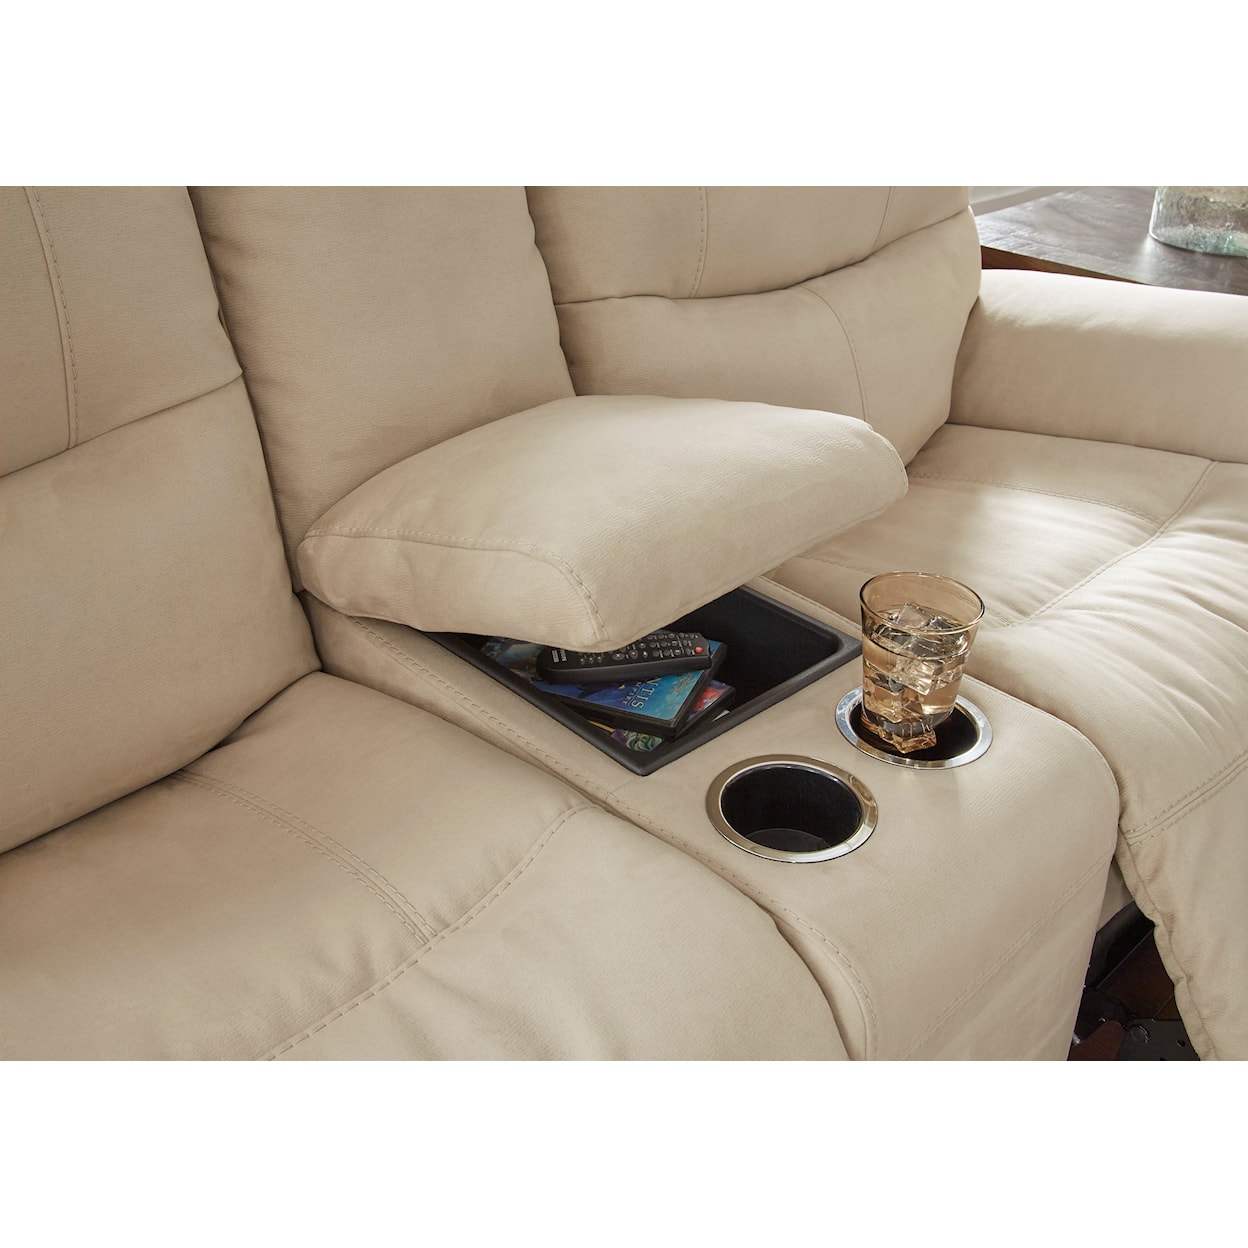 Michael Alan Select Next-Gen Gaucho Power Reclining Loveseat with Console